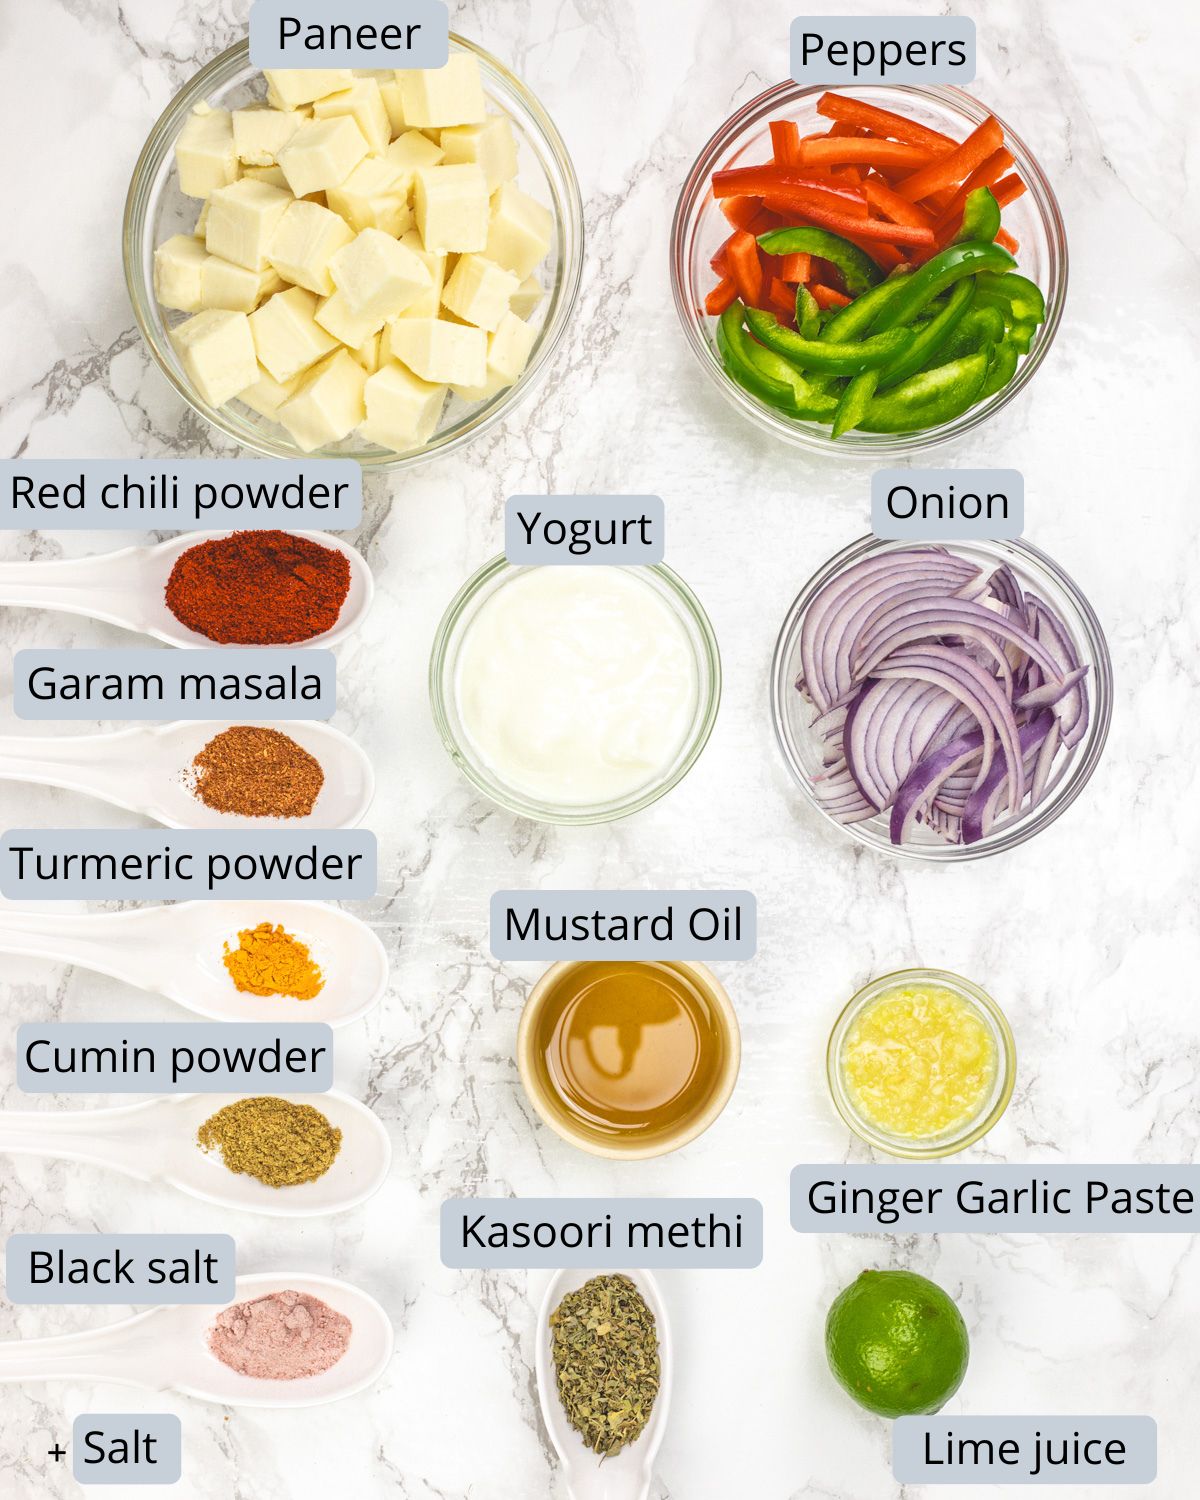 Paneer filling ingredients in bowls and spoons for paneer kathi roll with labels.